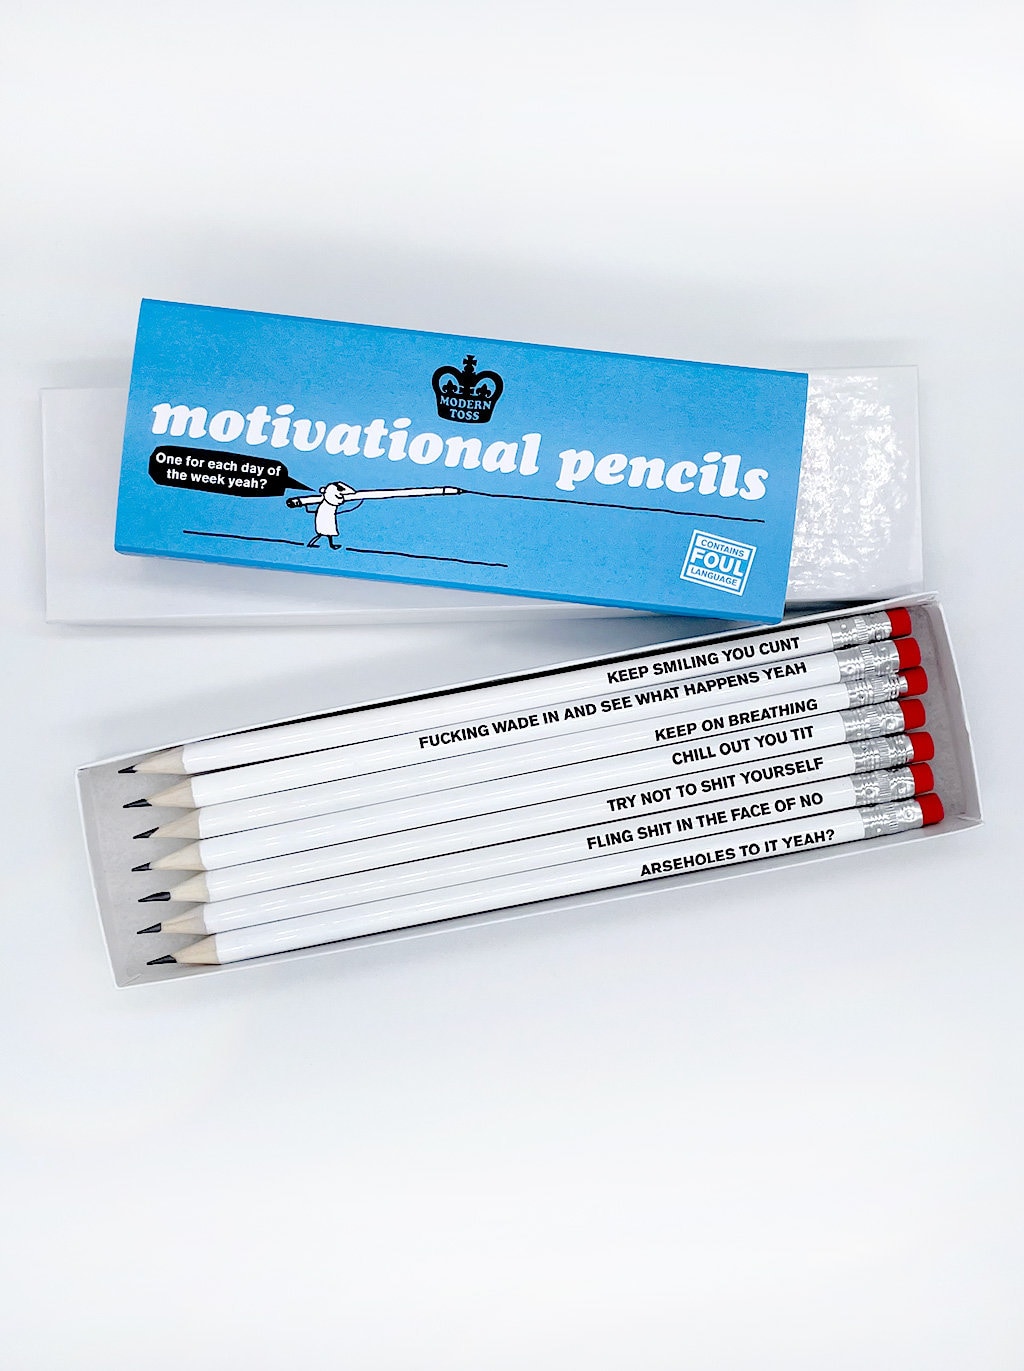 Offencils Profanity Pencils - Funny Curse Pencils - Naughty Words -  Offensive Pencils (Rated PG)